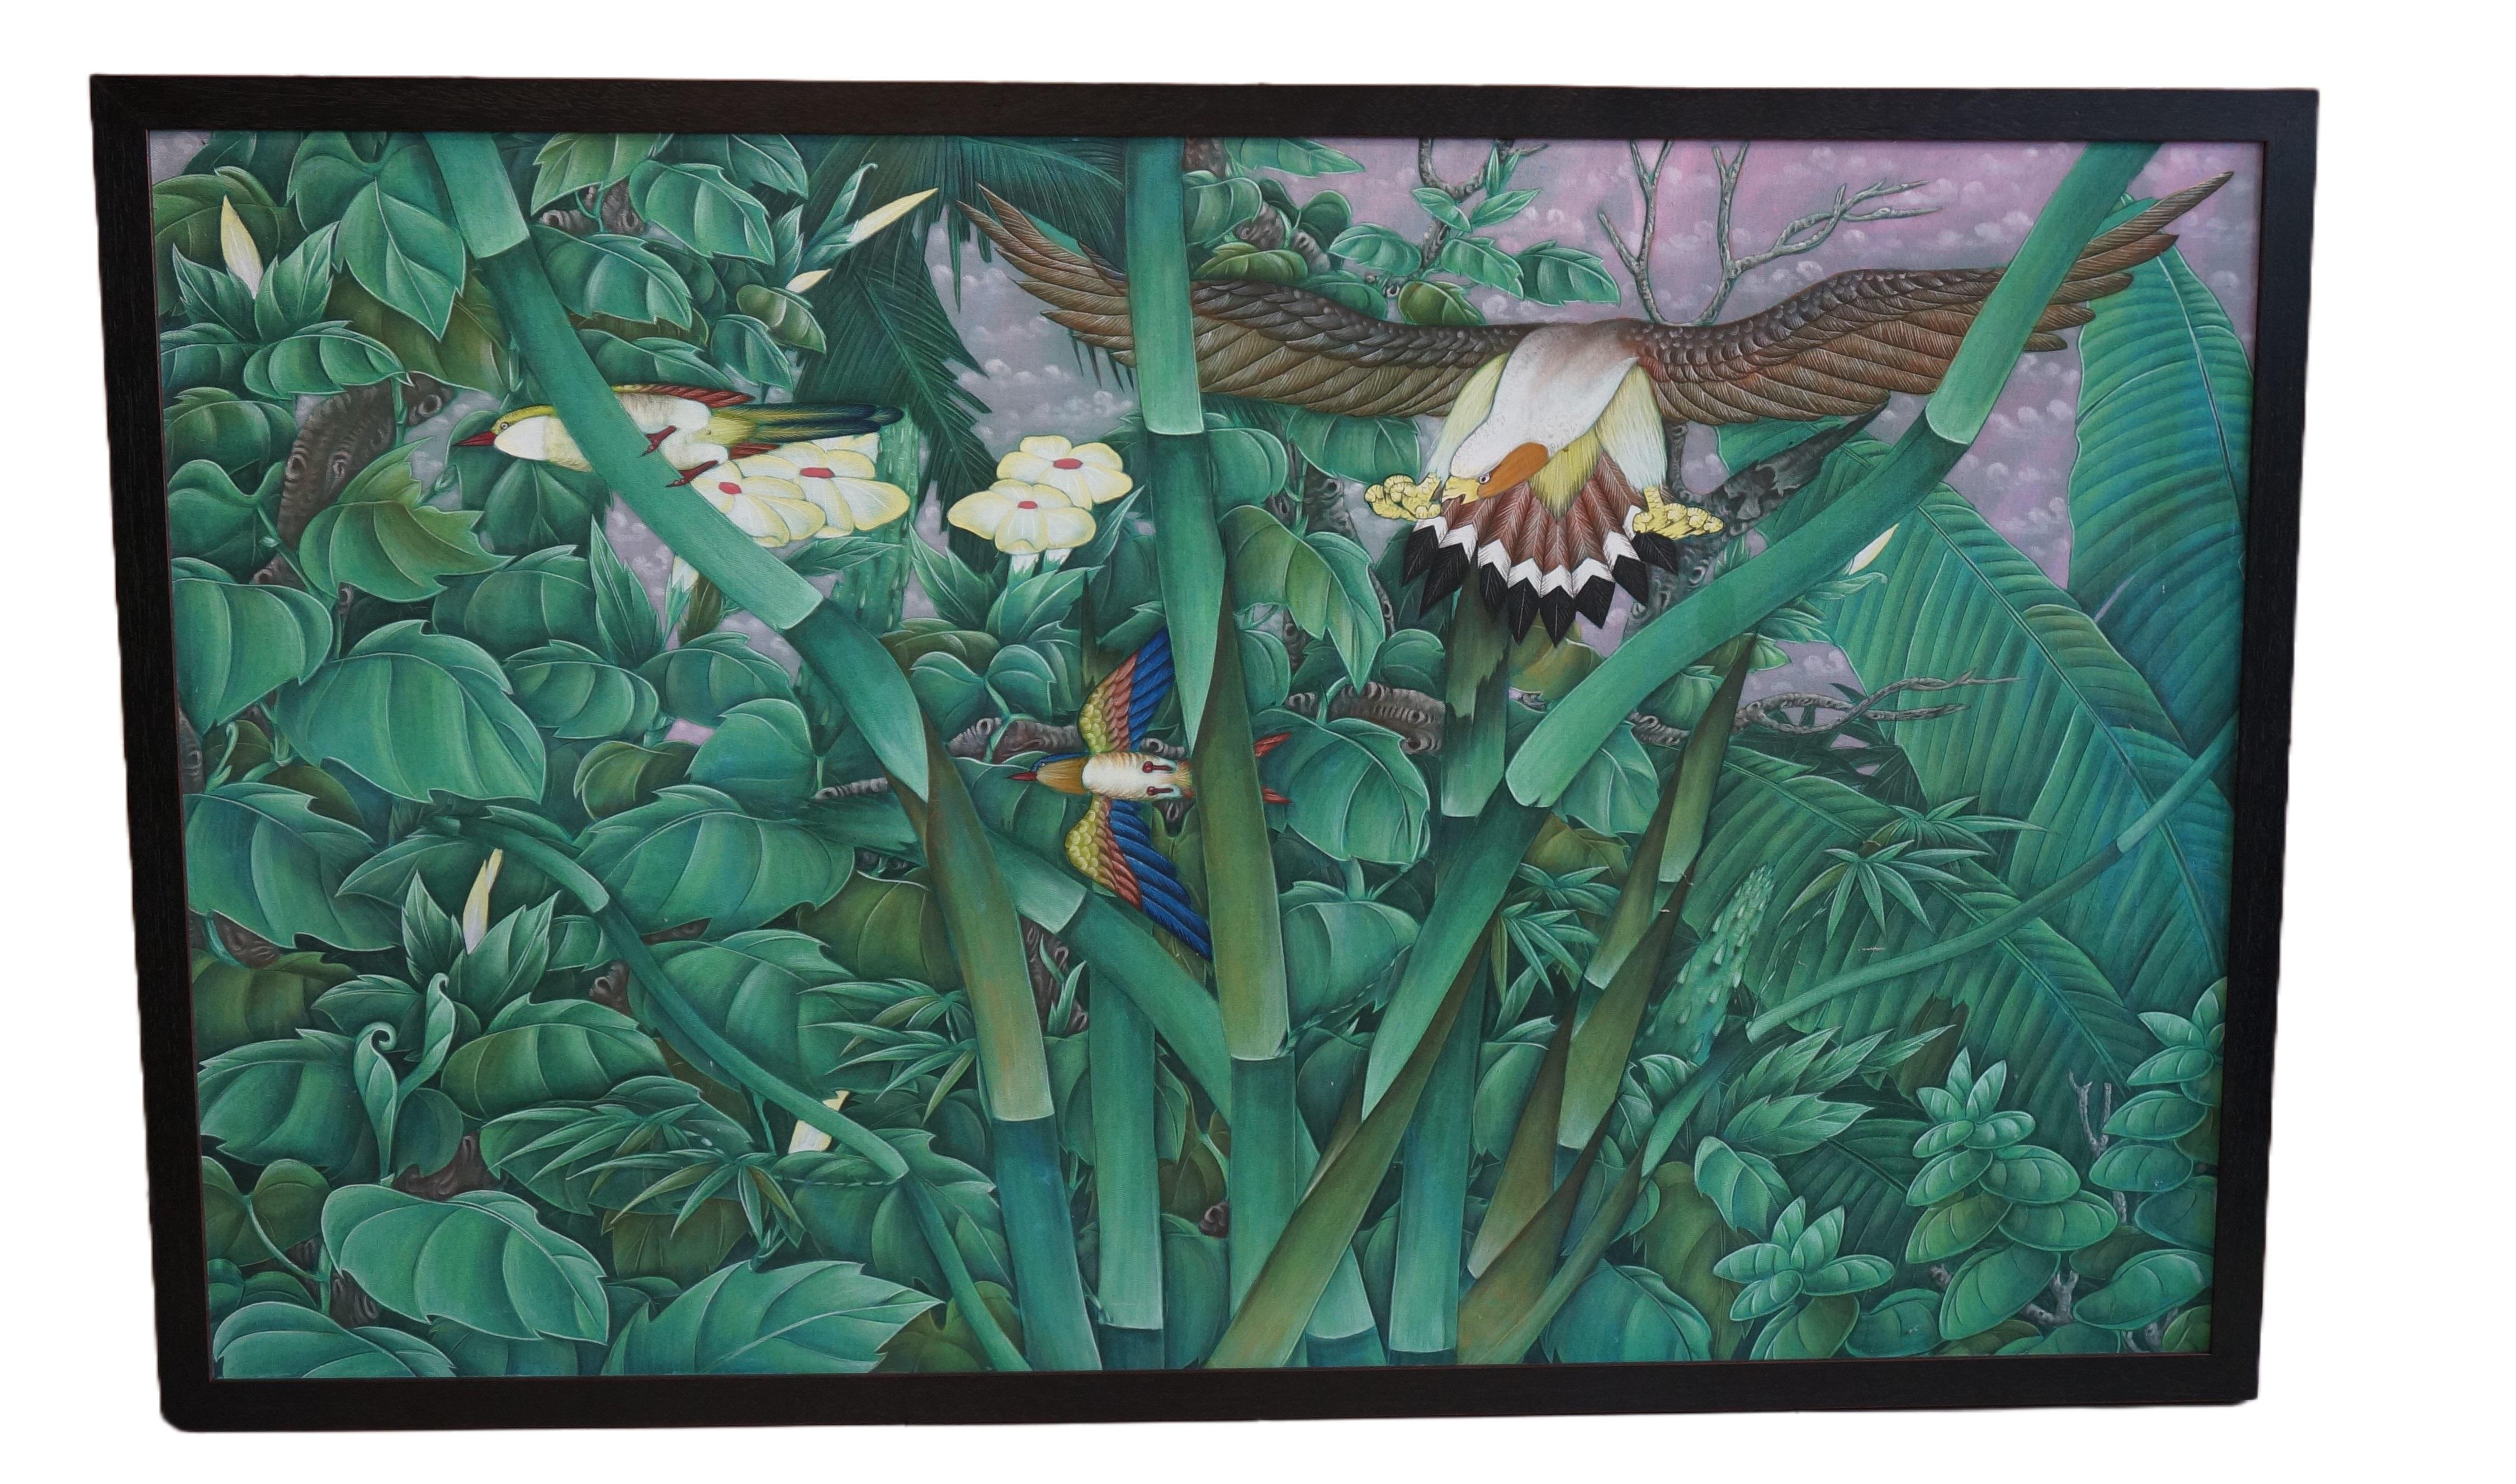 Artist unknown
Large Balinese painting on canvas depicting a tropical forest with birds.
Indonesia, second half 20th century

In modern frame

Dimensions: 83 x 135 cm. (without frame)

Overall in good condition, a few traces of wear (see images)